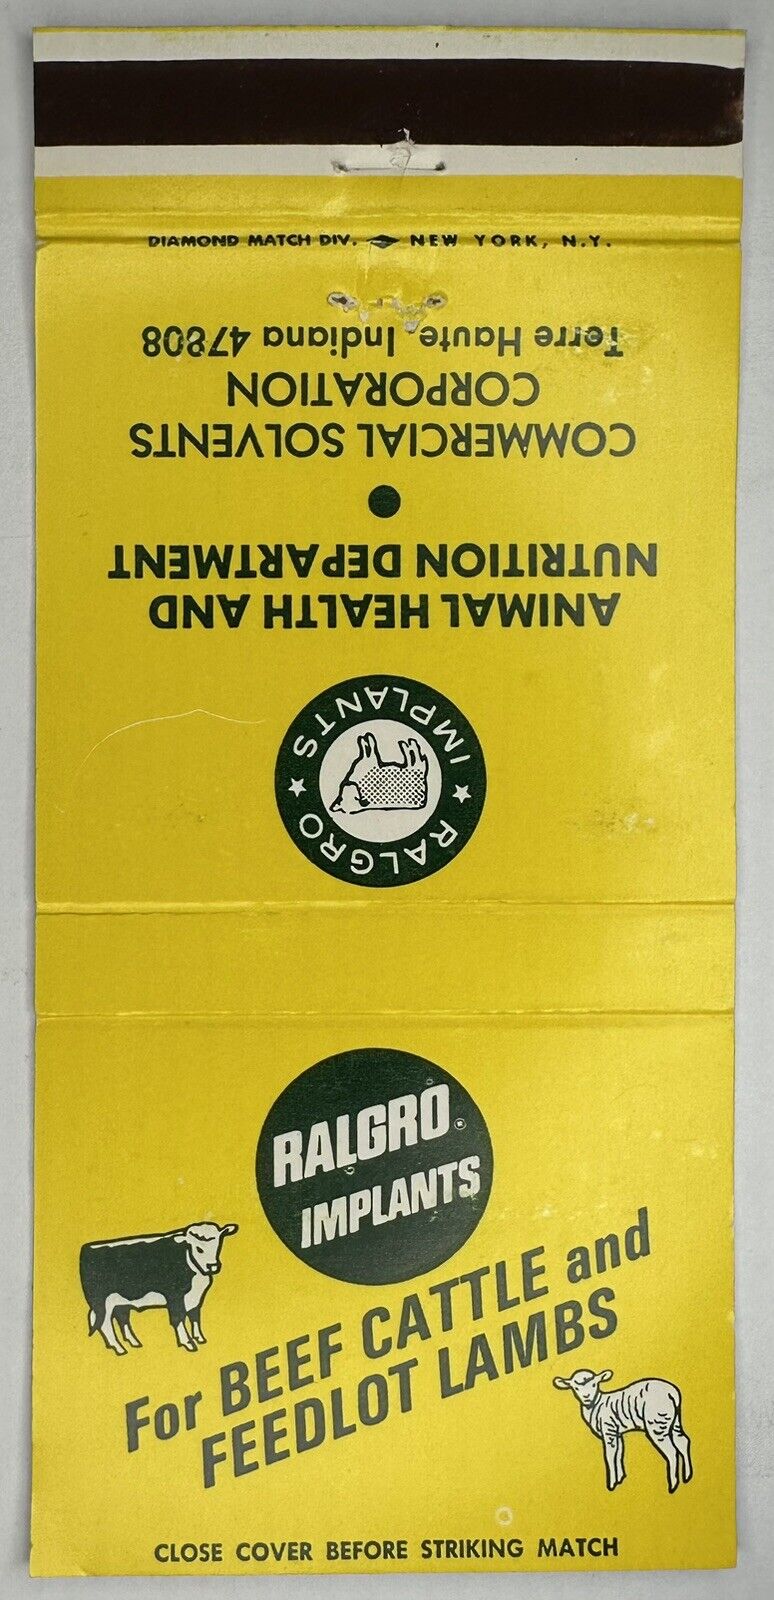 Vintage Matchbook Cover / Ralgro Implements / Growth Hormones / Farming / Calf